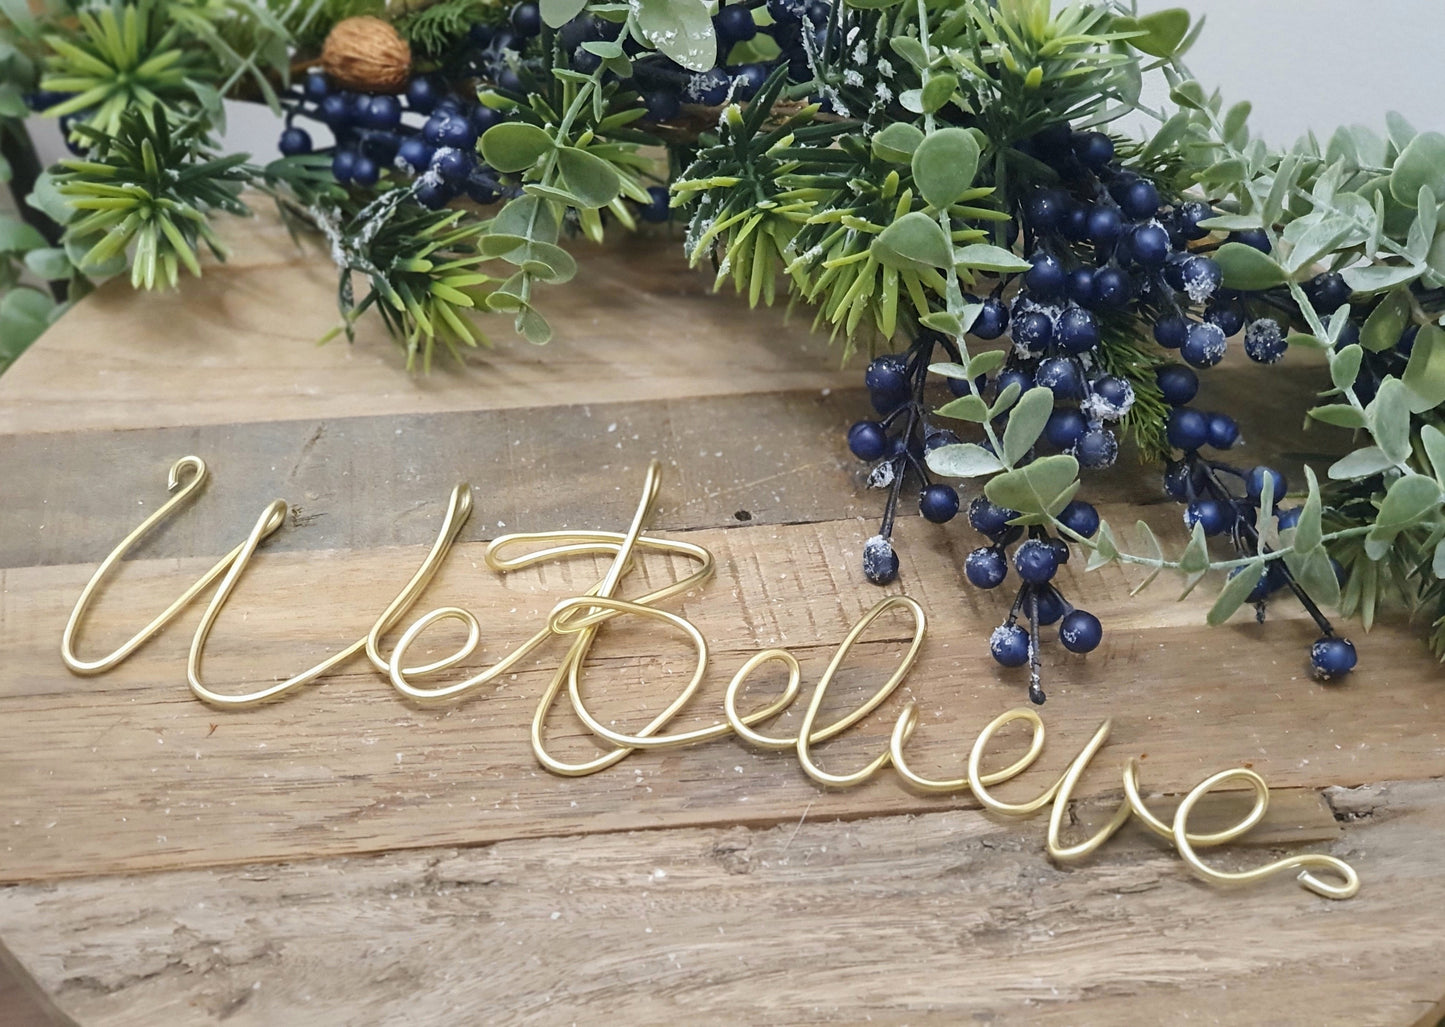 Gold We Believe Wire Word Mantle or Table Decoration Framed with a Festive frosted Berry Garland